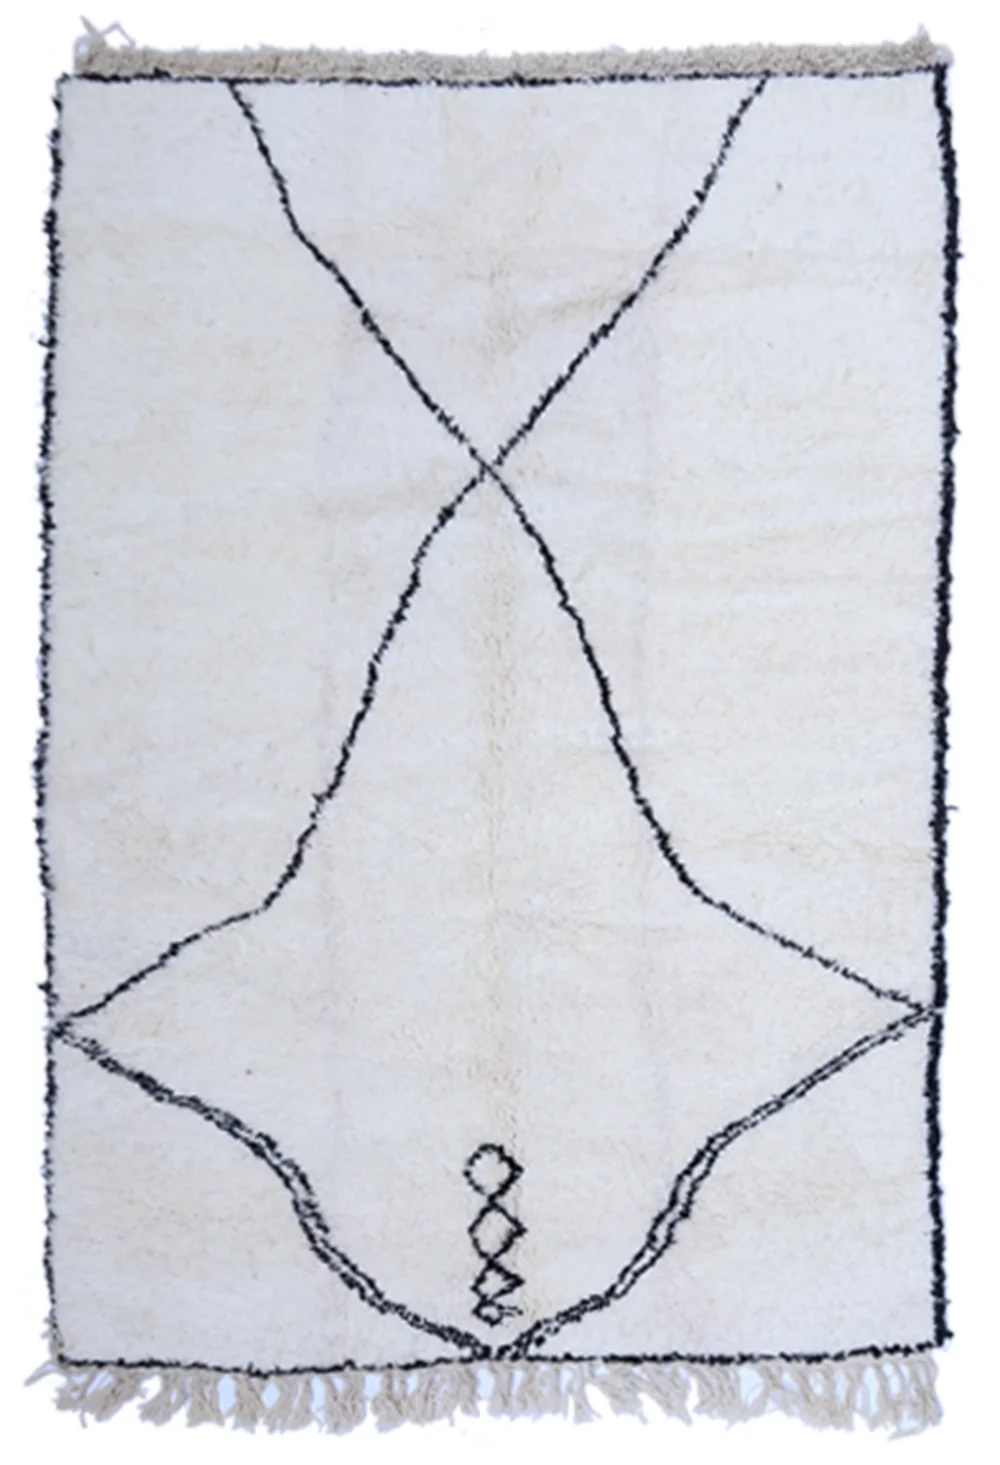 "Handwoven Moroccan Beni Ourain rug with distinctive star and geometric designs on a natural wool background"